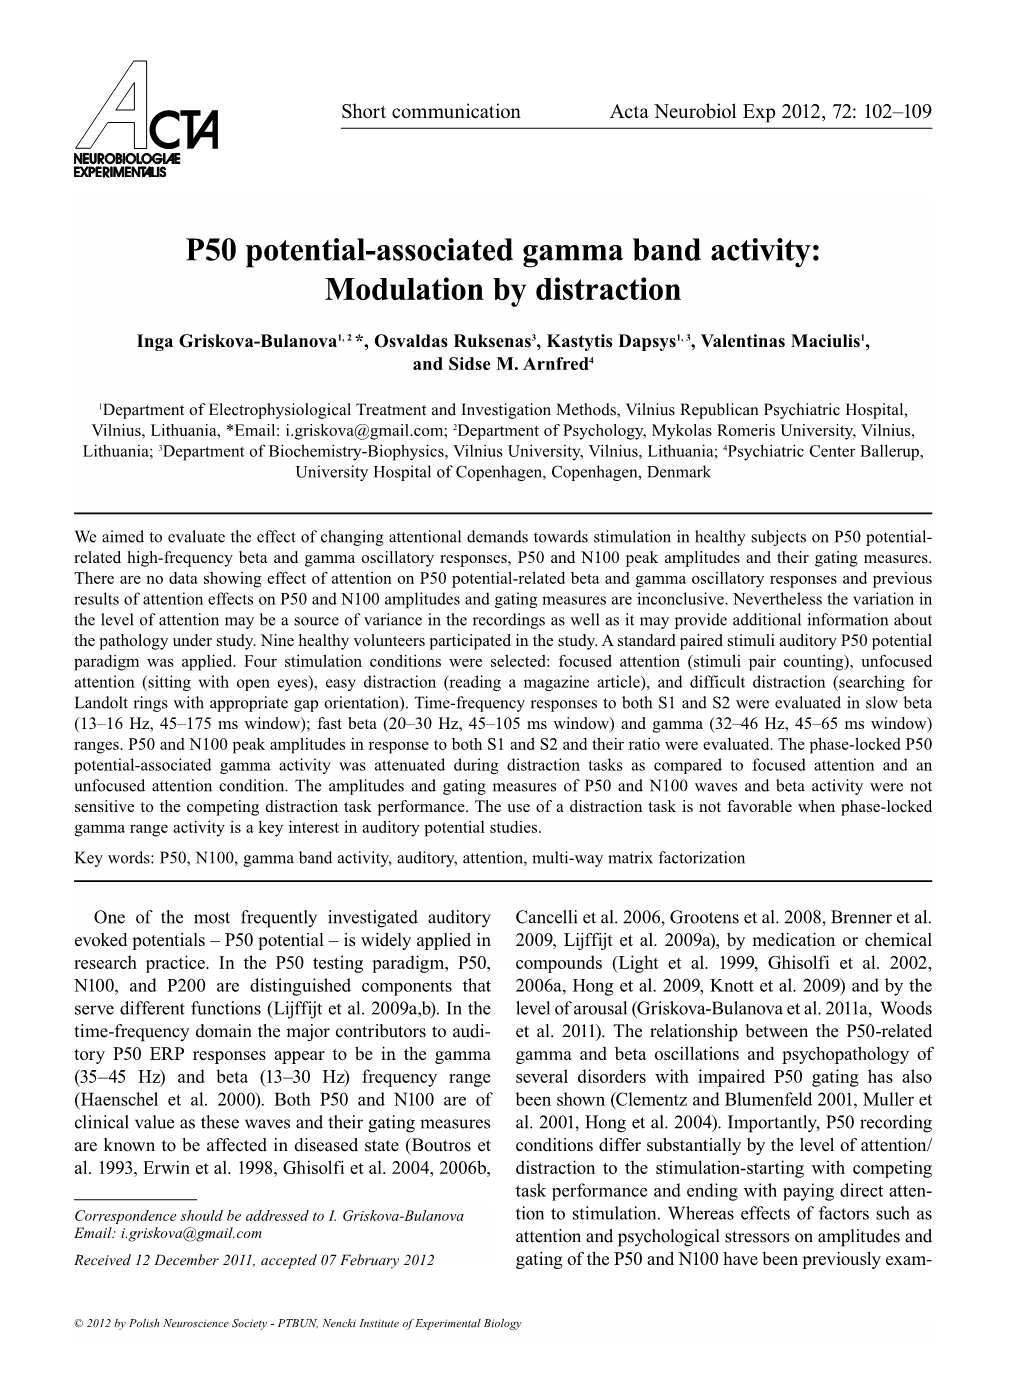 P50 Potential-Associated Gamma Band Activity: Modulation by Distraction